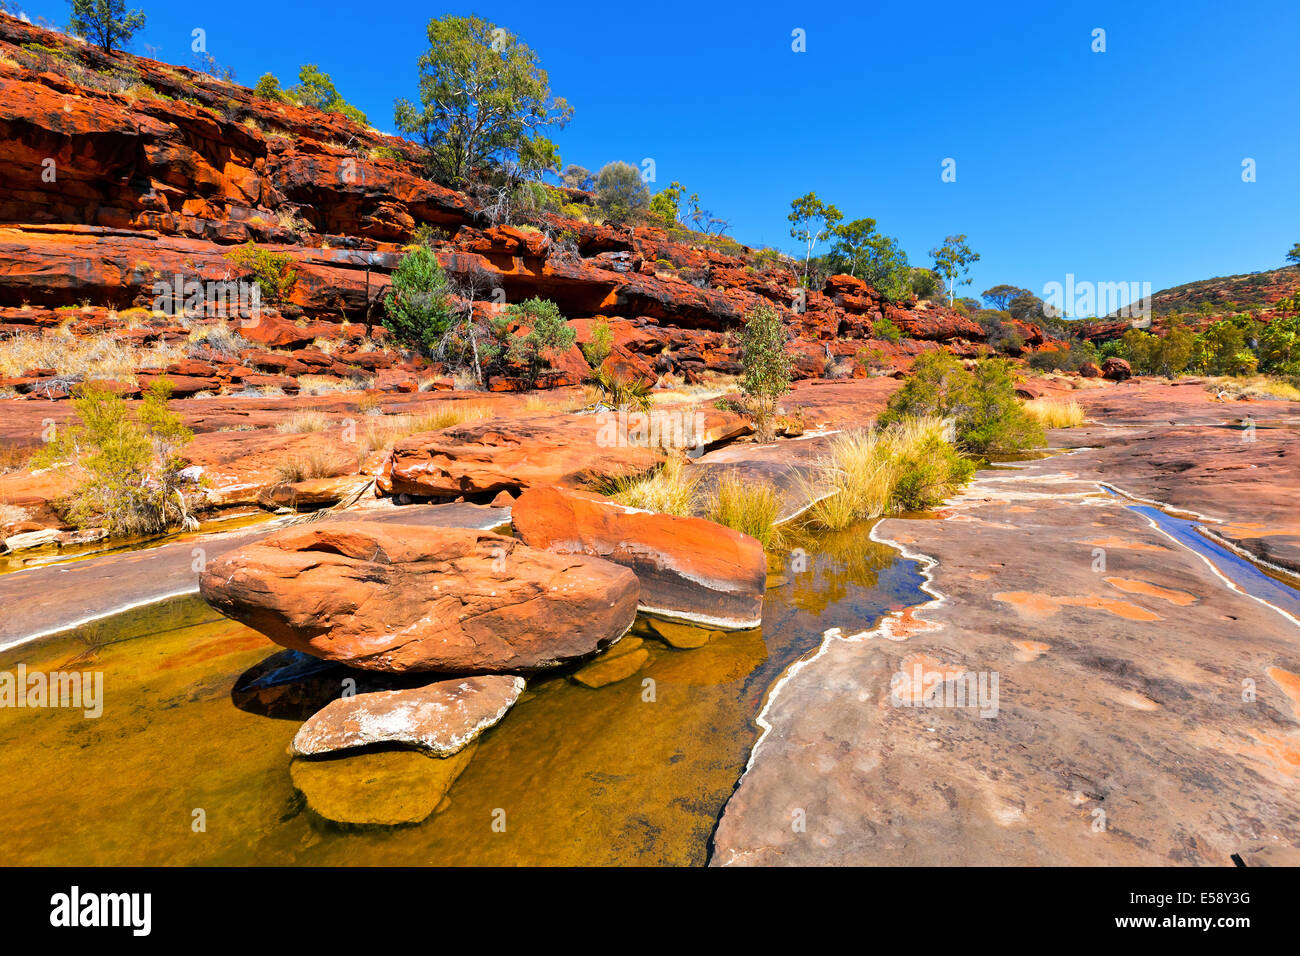 Palm Valley Central Australia Northern Territory Stock Photo